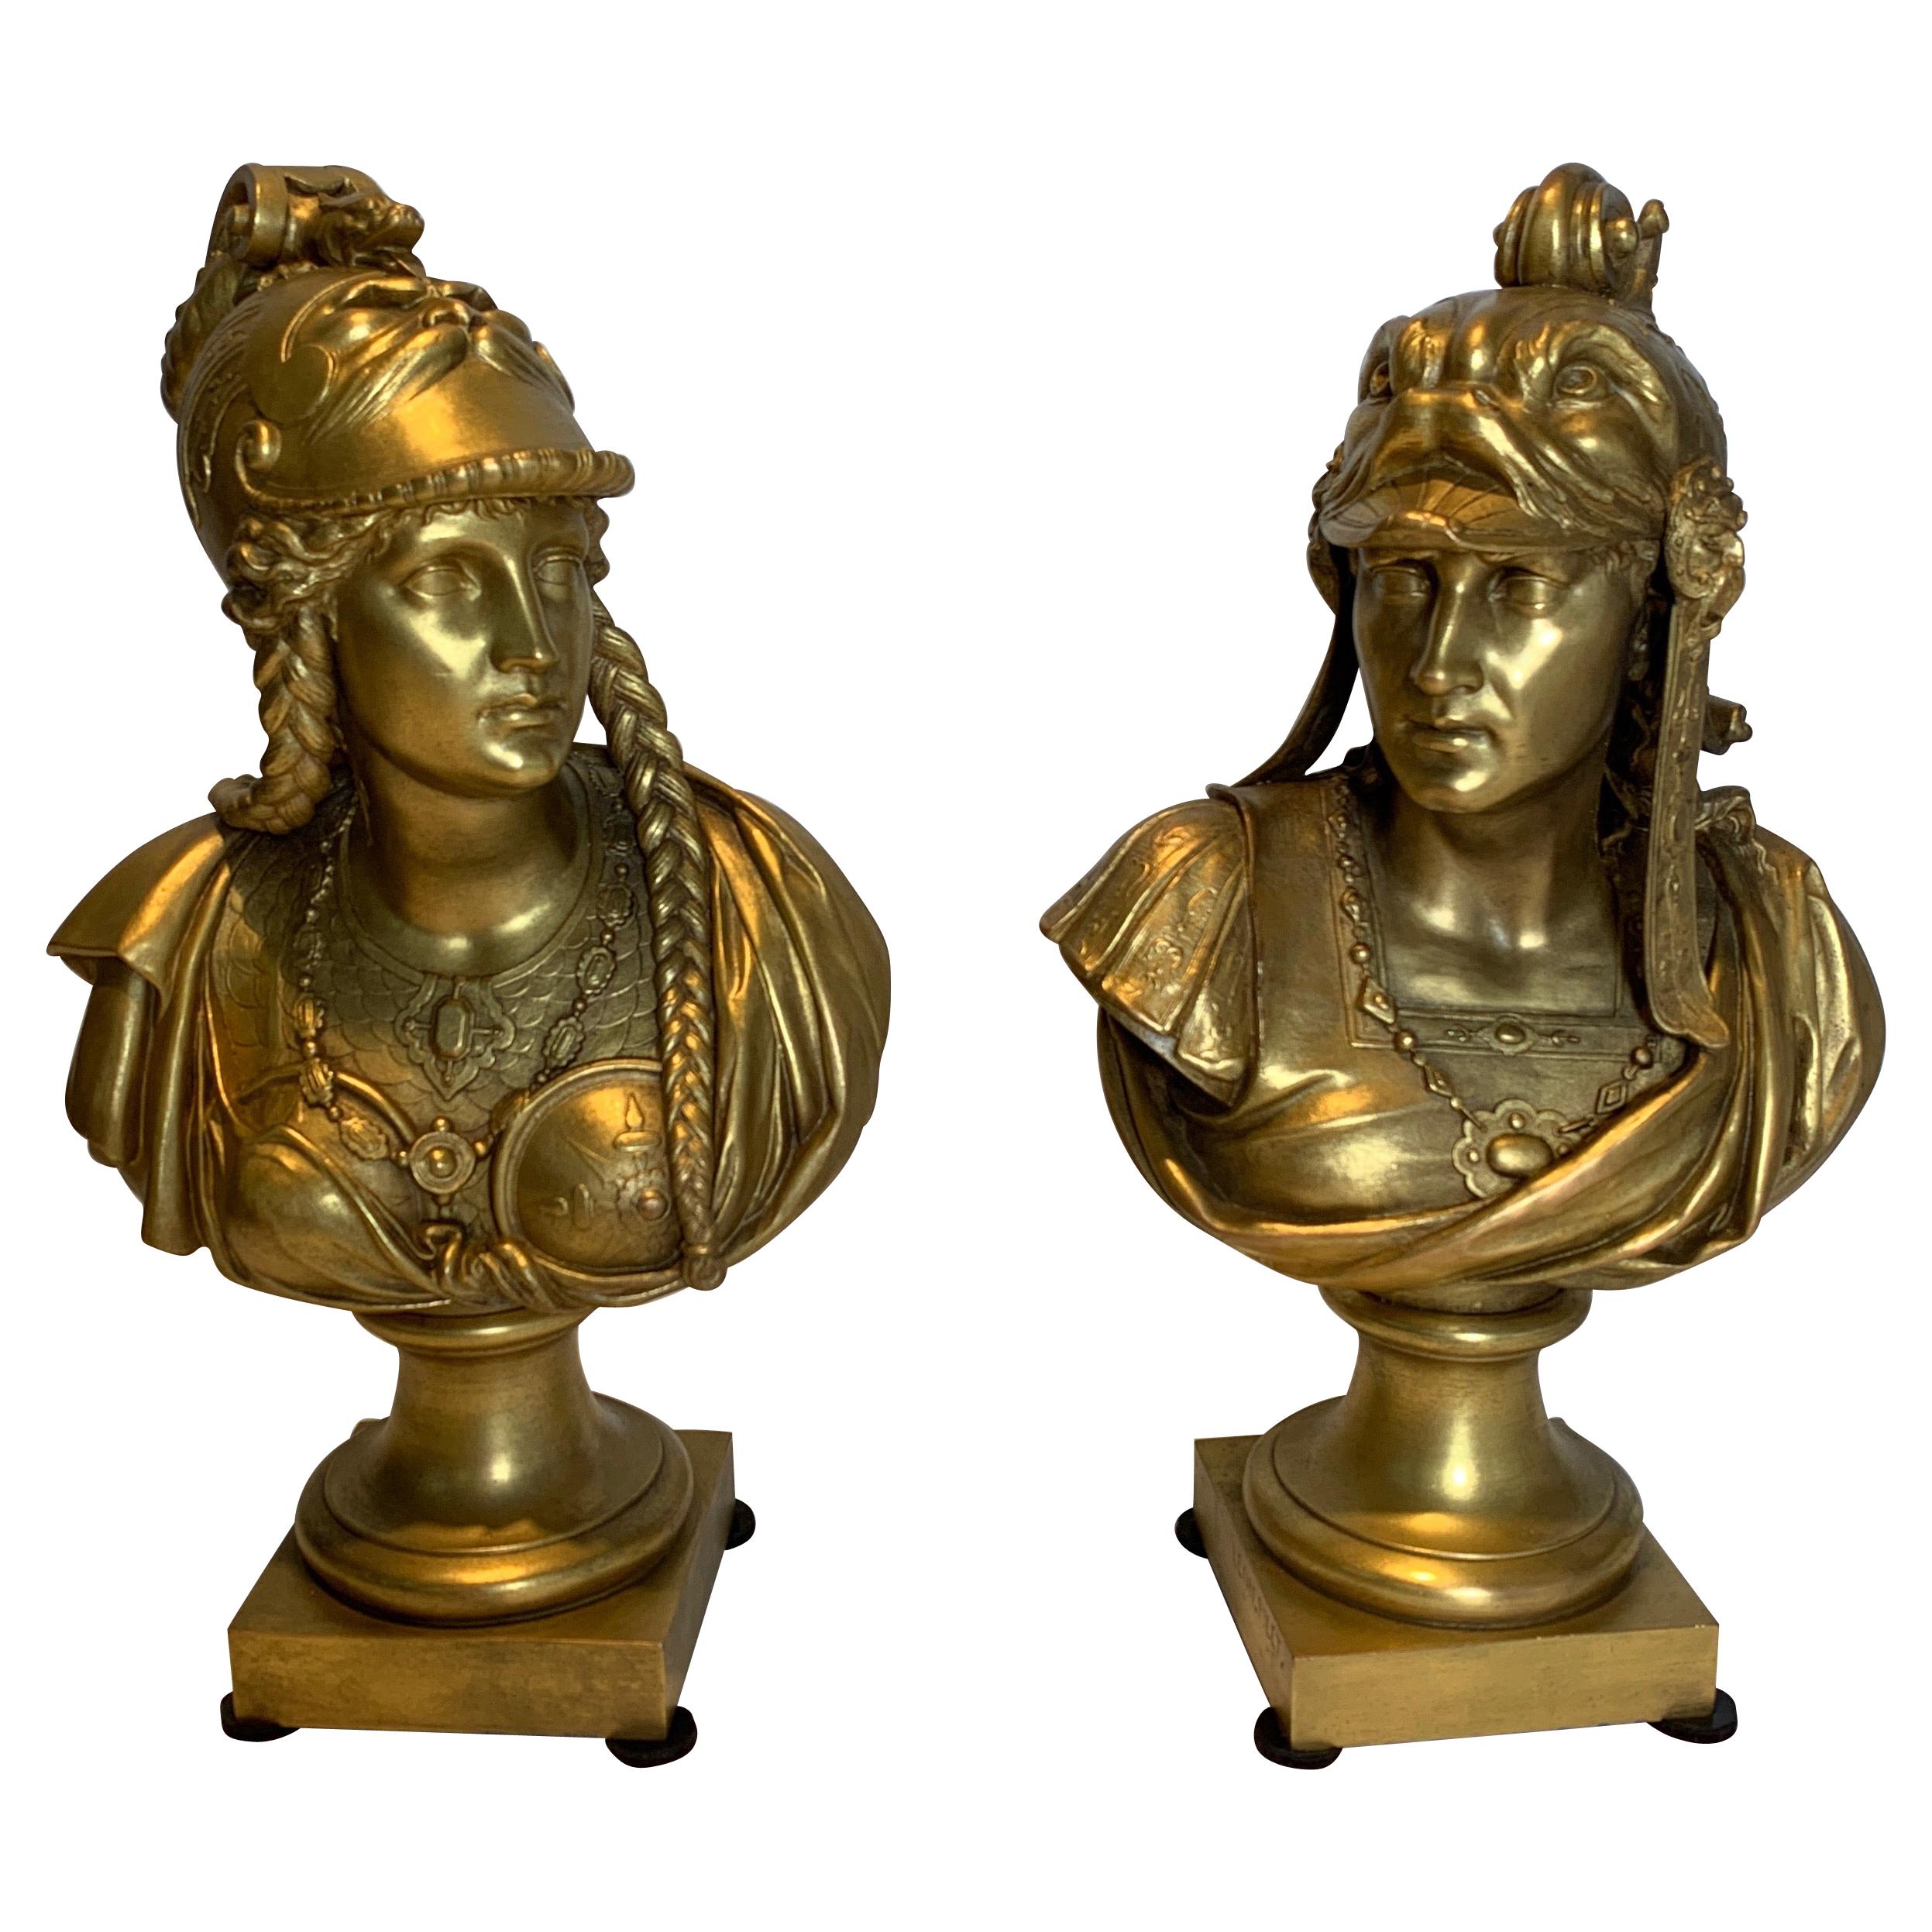 Pair of Gilt Bronze Neoclassical Busts of Minerva and Perseus